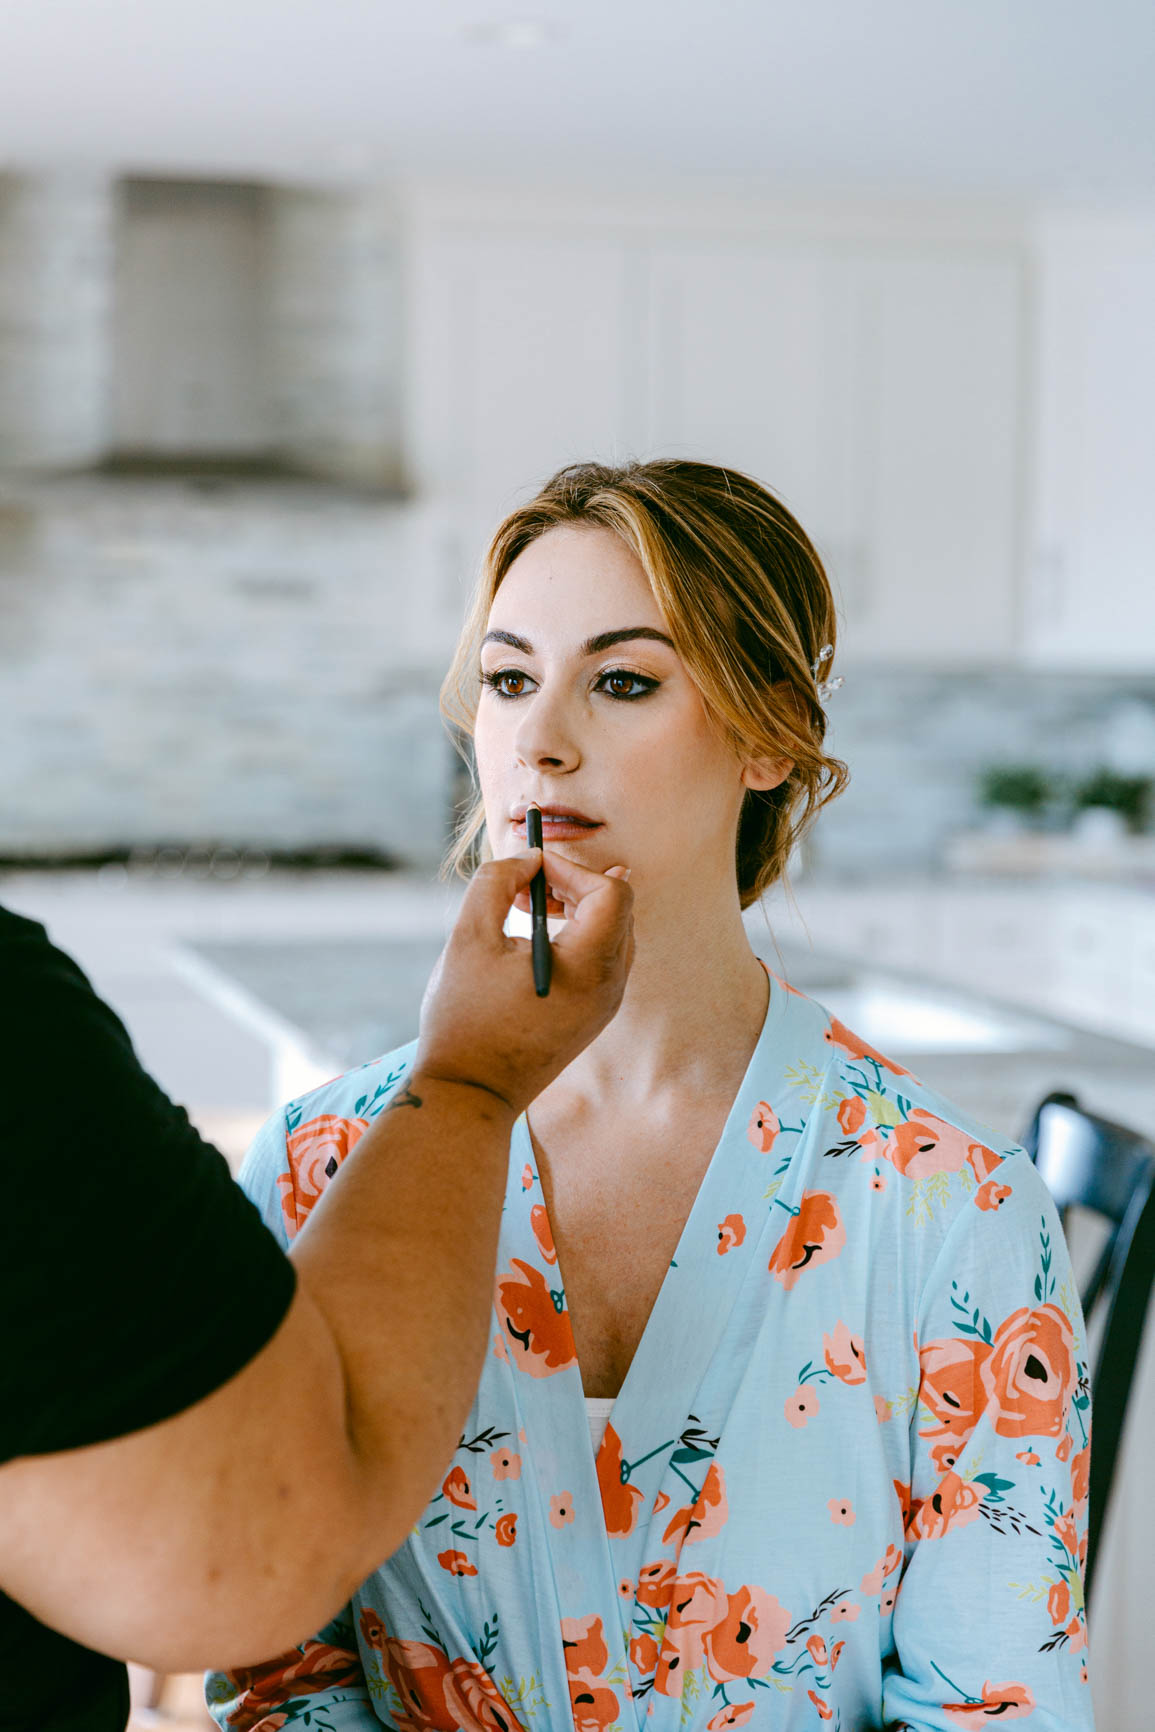 brdie applying lipstick in Mooresville lake house elopement shot by Nhieu Tang Photography | nhieutang.com